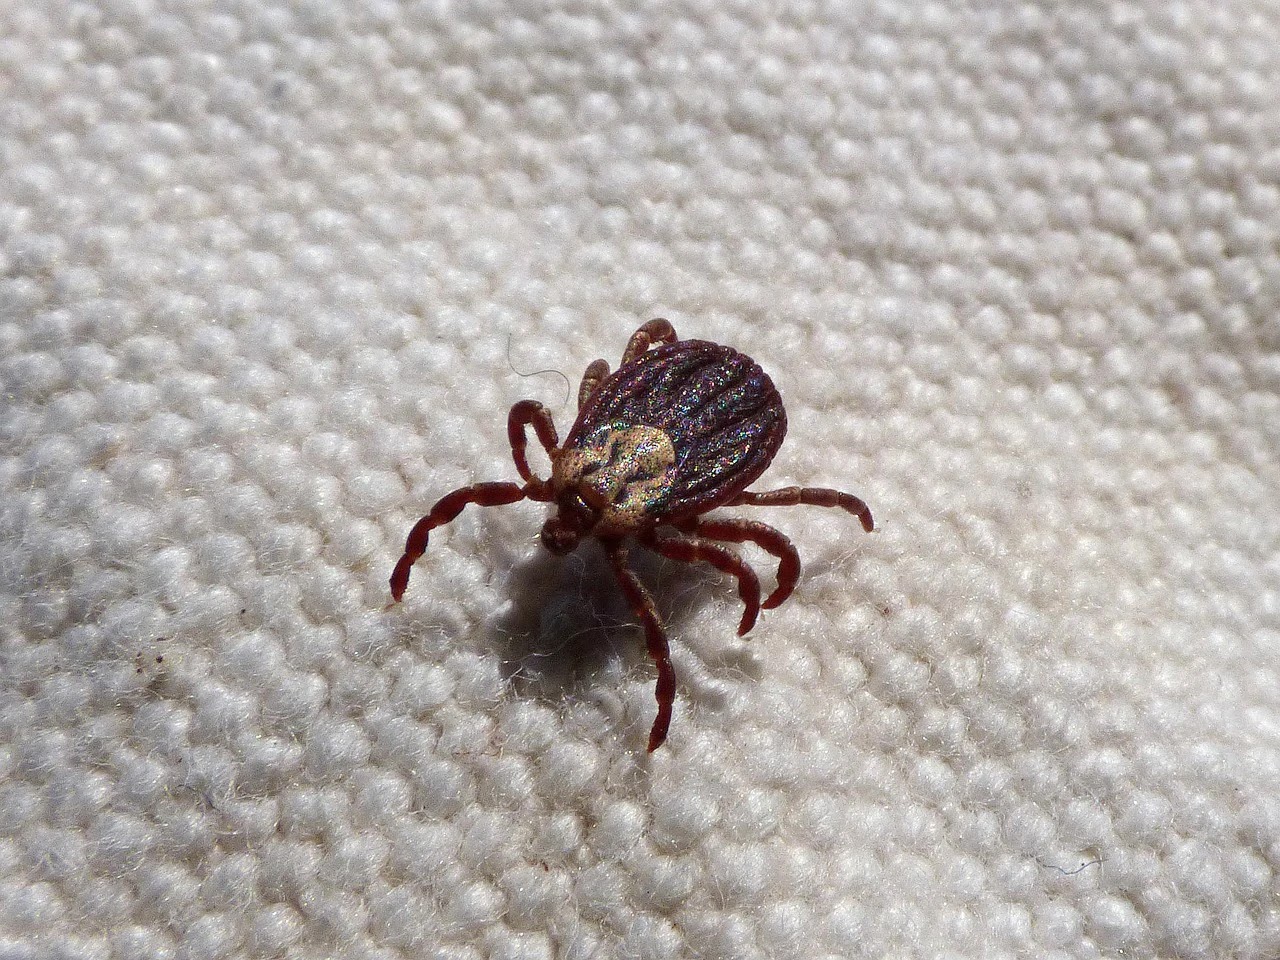 An Uptick in Ticks: Protecting Yourself from Tick-Related Illnesses